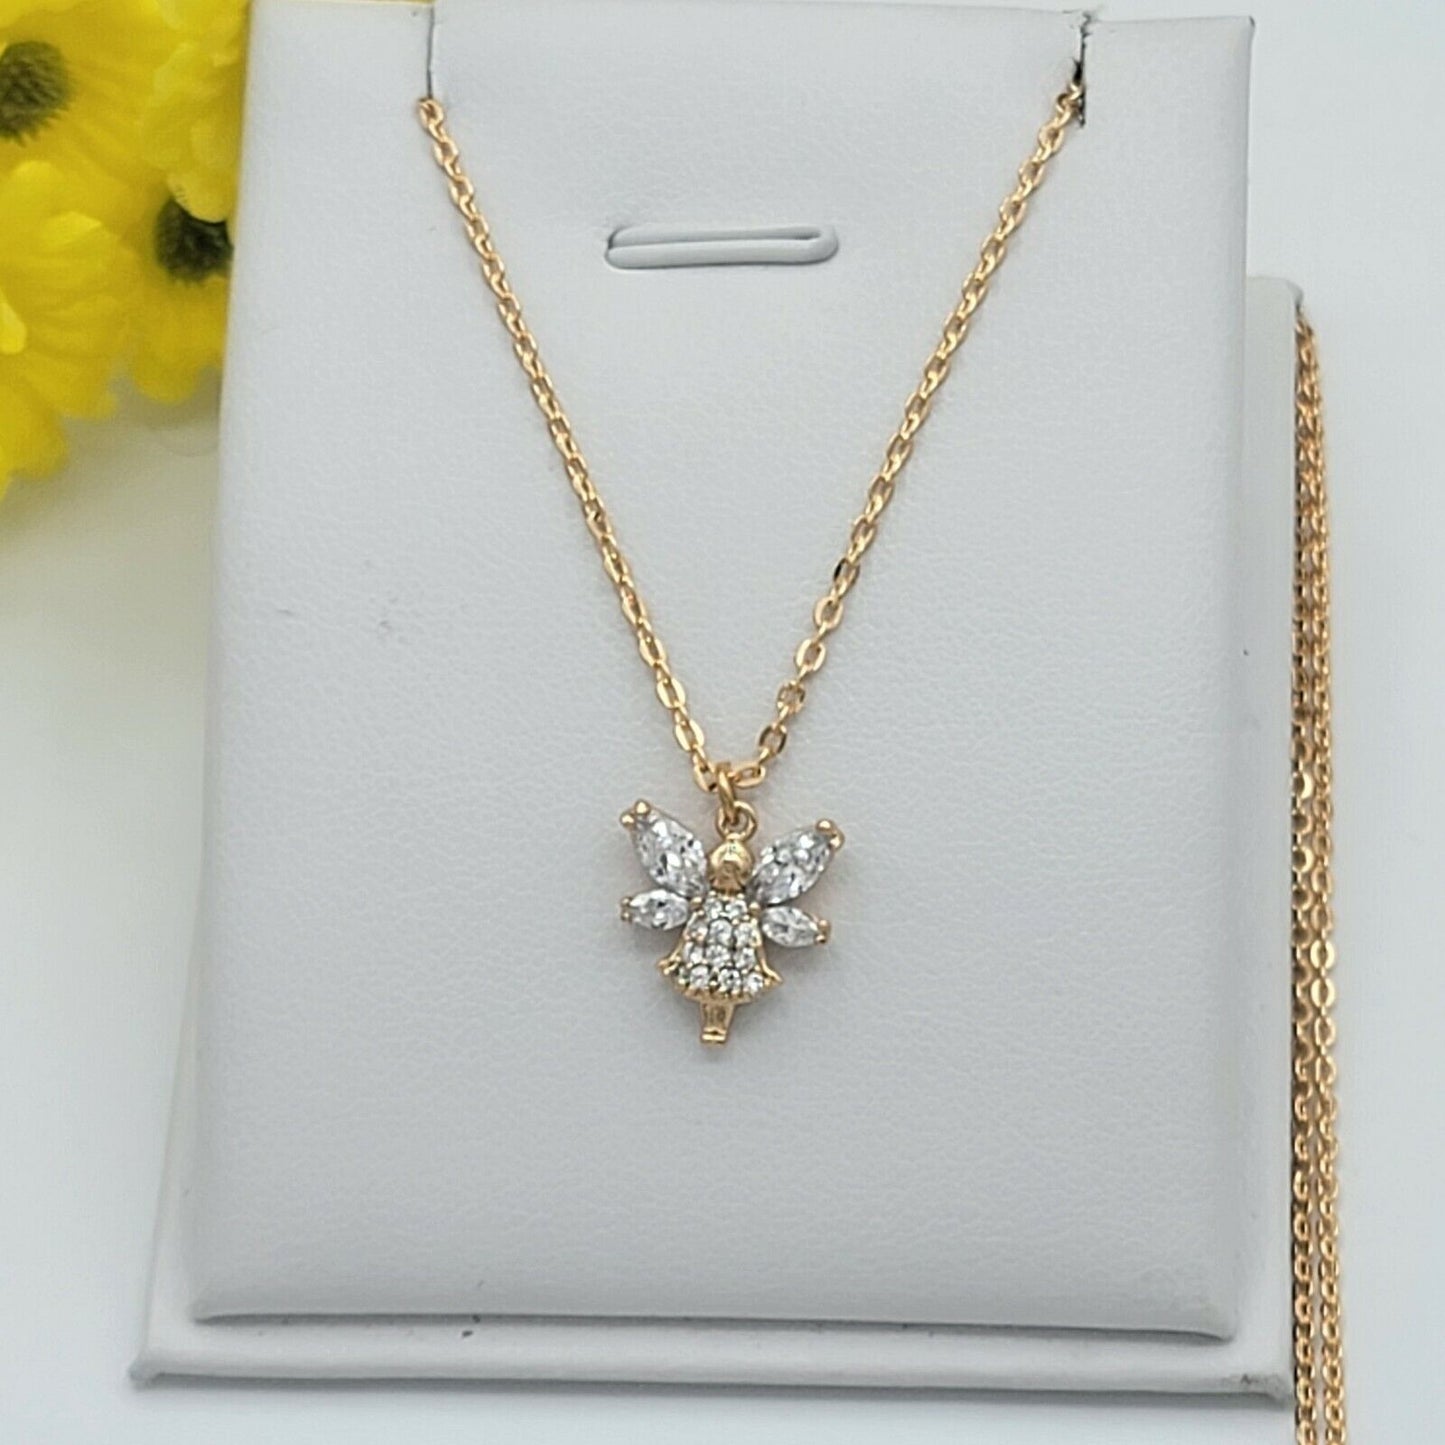 Necklaces - 18K Gold Plated. Clear Crystals Fairy Angel Pendant & Chain.